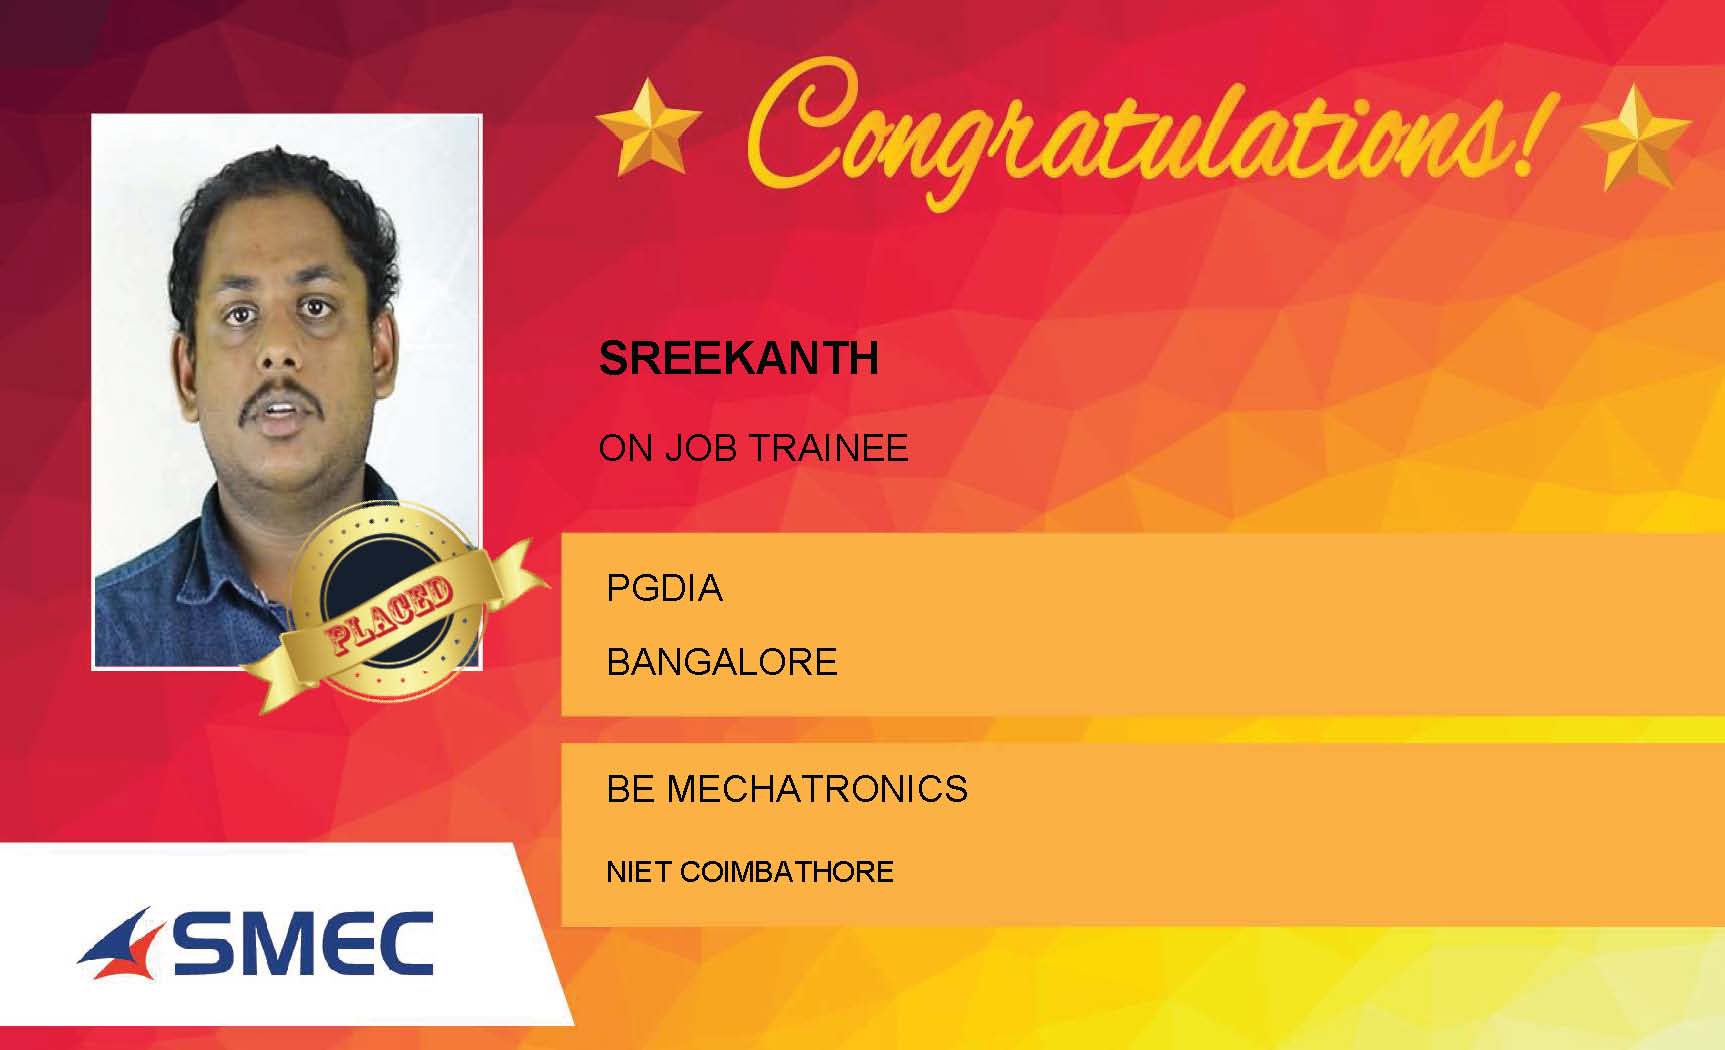 Sreekanth Placed Successfully On Job Trainee